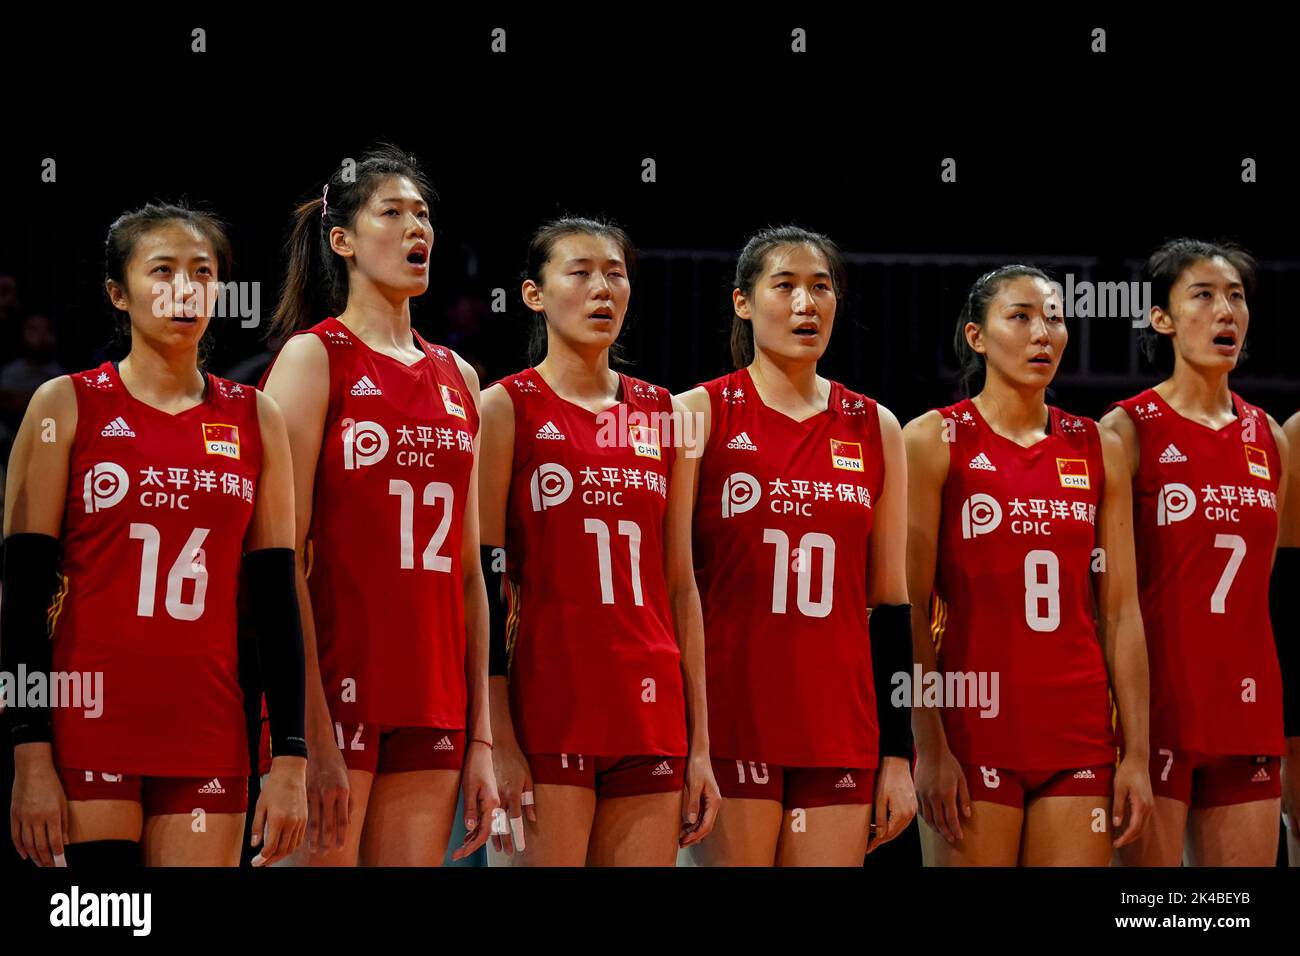 ARNHEM, NETHERLANDS - SEPTEMBER 25: Xia Ding of China, Yingying Li of China, Yizhu Wang of China, Yunlu Wang of China, Ye Jin of China and Yuanyuan Wang of China line up for the national anthem during the Pool D Phase 1 match between China and Argentina on Day 3 of the FIVB Volleyball Womens World Championship 2022 at the Gelredome on September 25, 2022 in Arnhem, Netherlands (Photo by Rene Nijhuis/Orange Pictures) Stock Photo